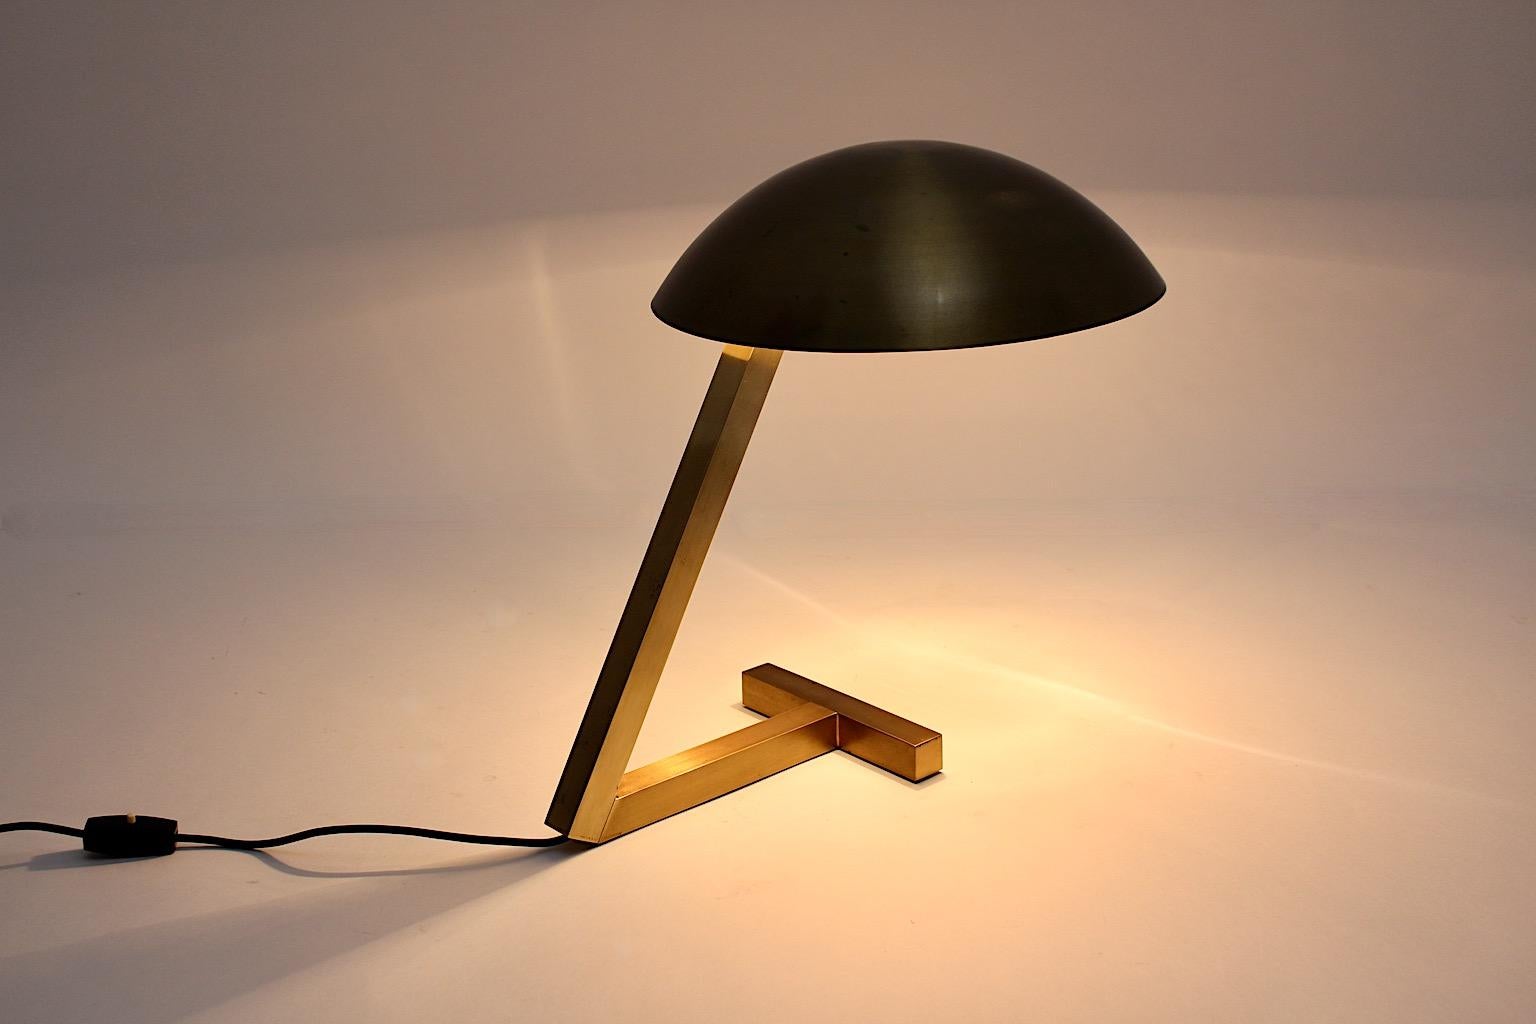 Space Age Brass Vintage Dome Geometric Table Lamp Desk Lamp 1960s Italy For Sale 6